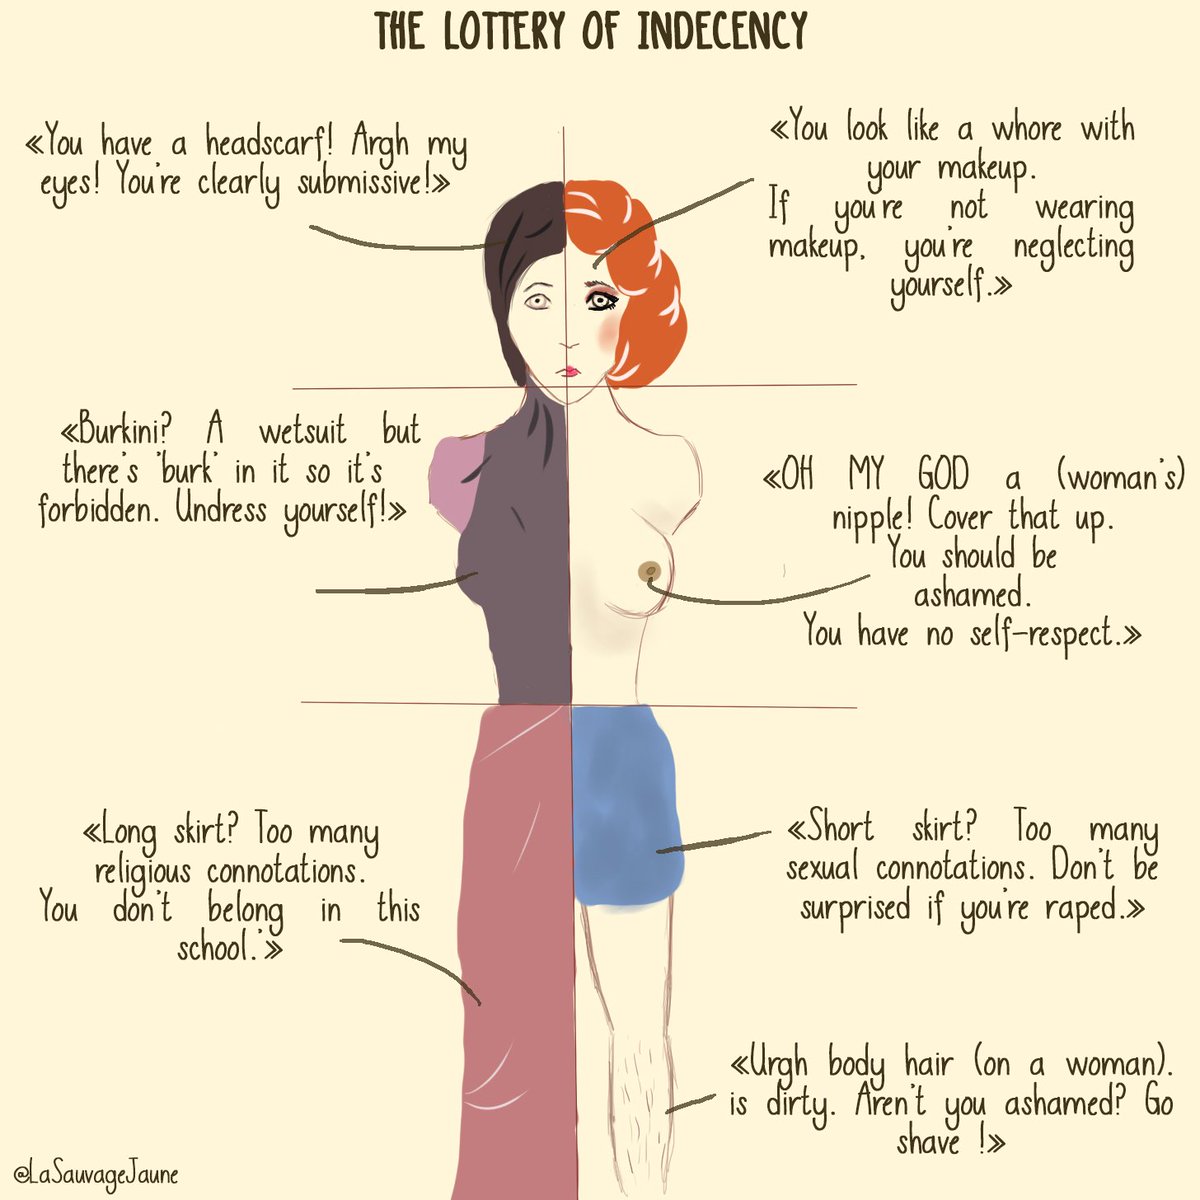 The lottery of indecency